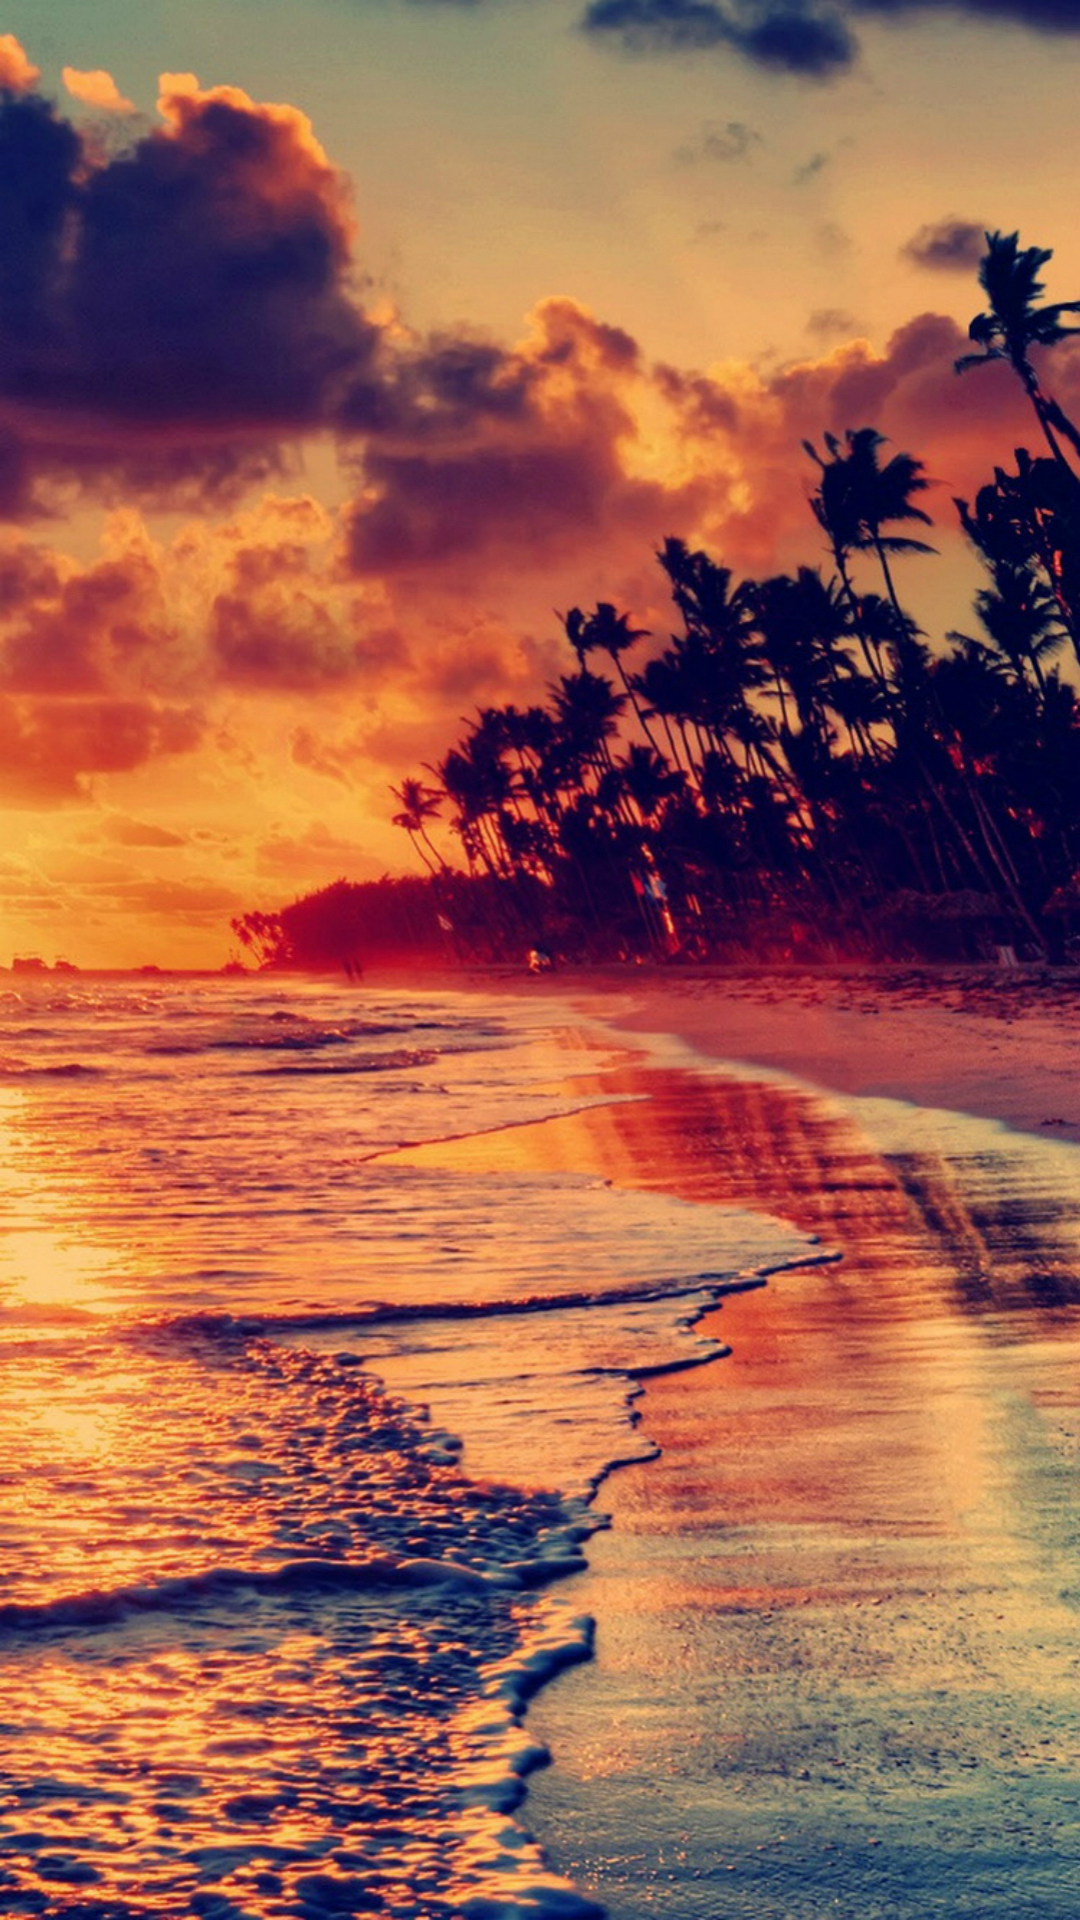 4000+ HD Wallpapers for Android Smartphones & iPhones Free